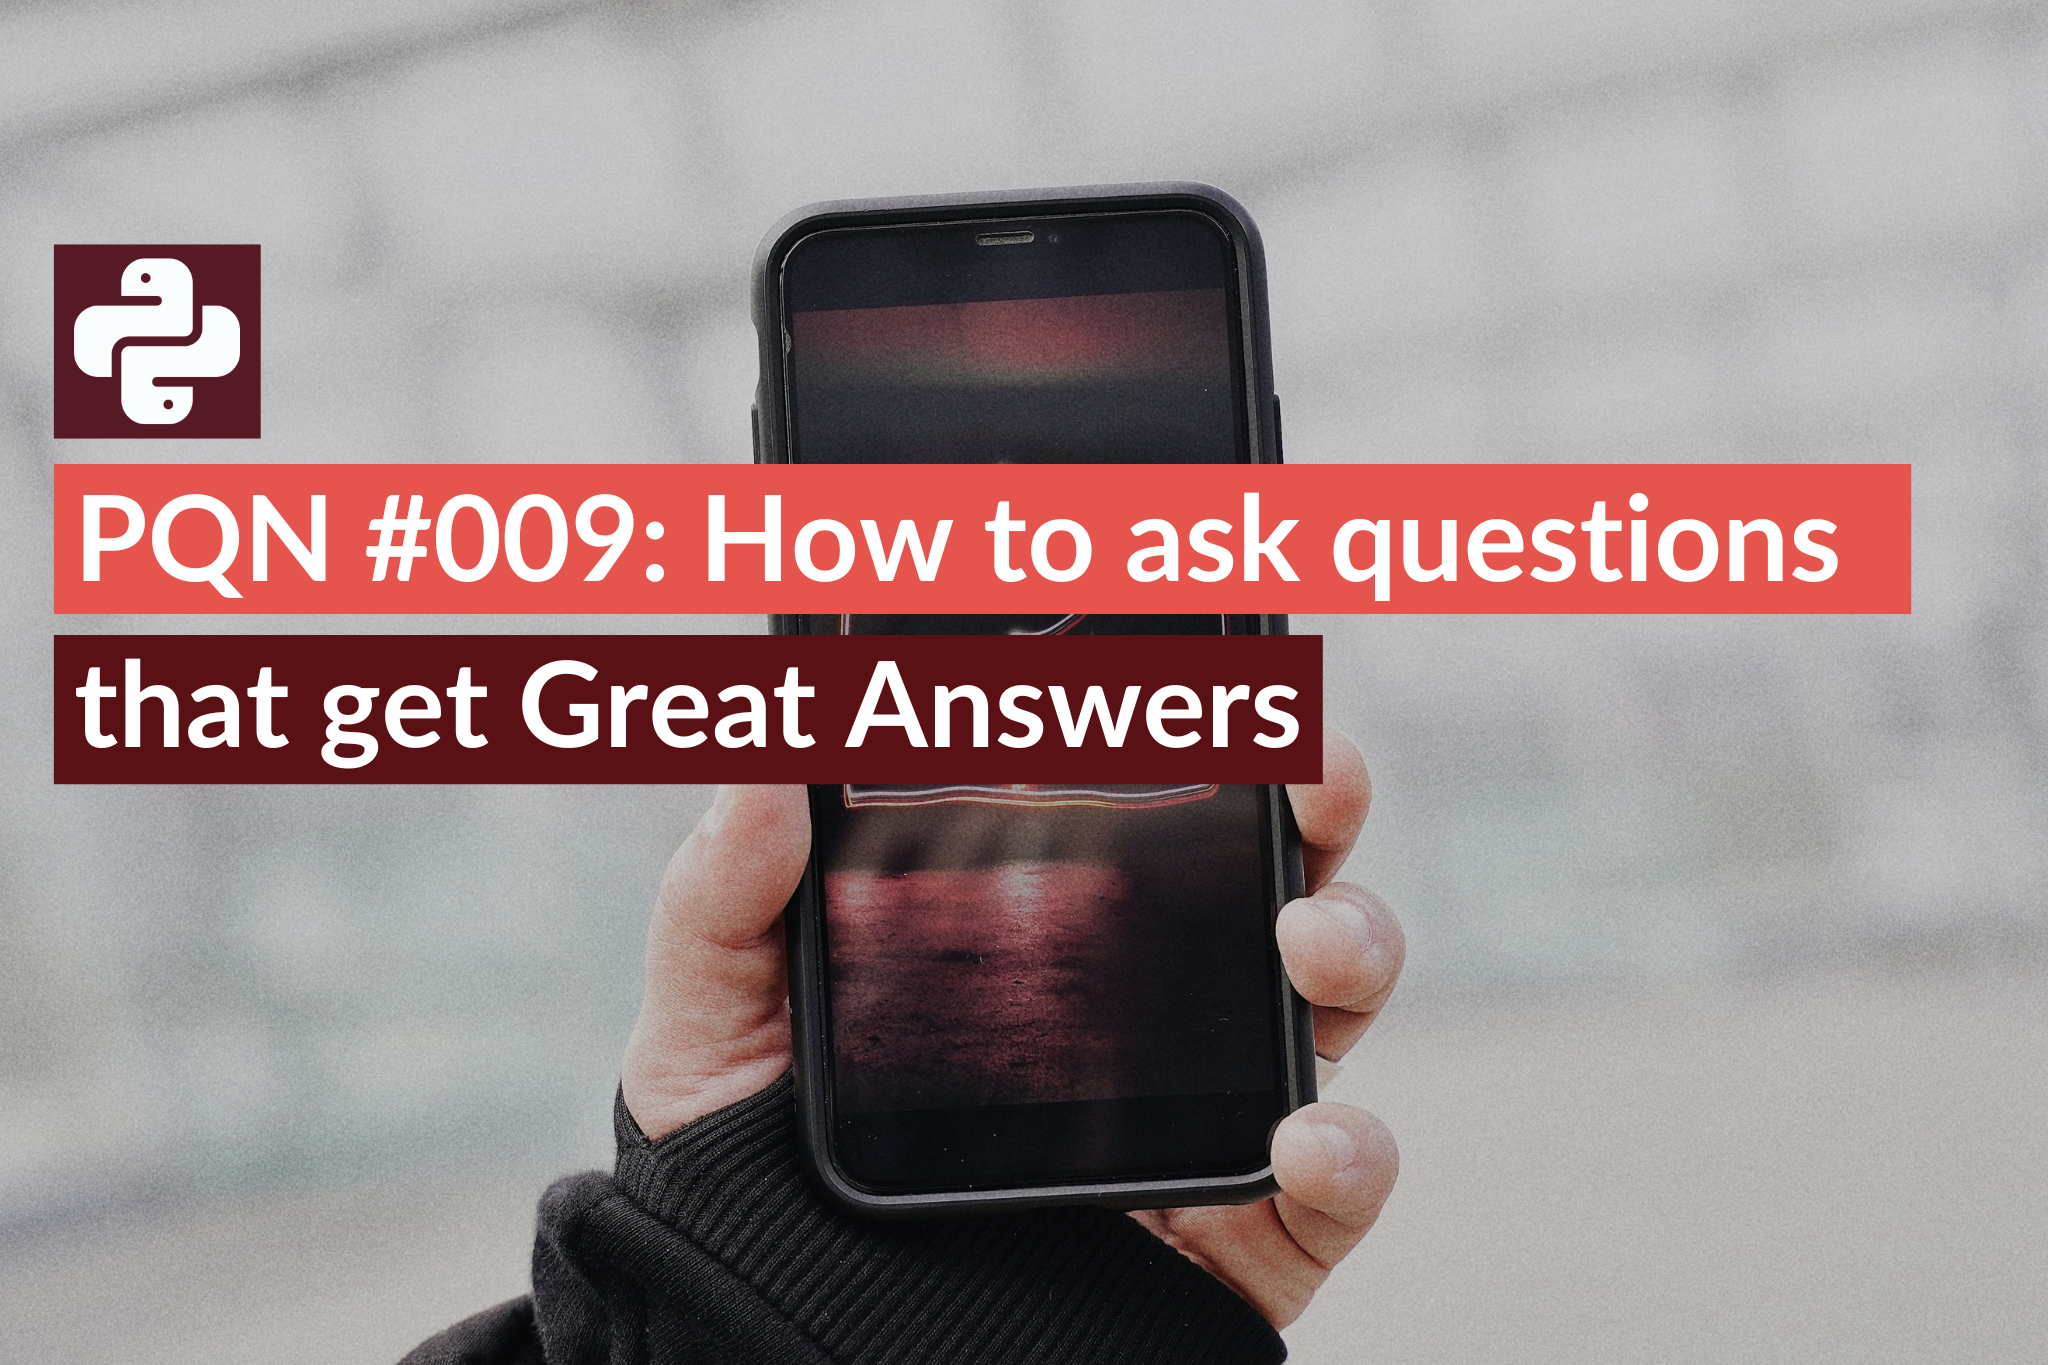 PQN #009 How to ask questions that get Great Answers